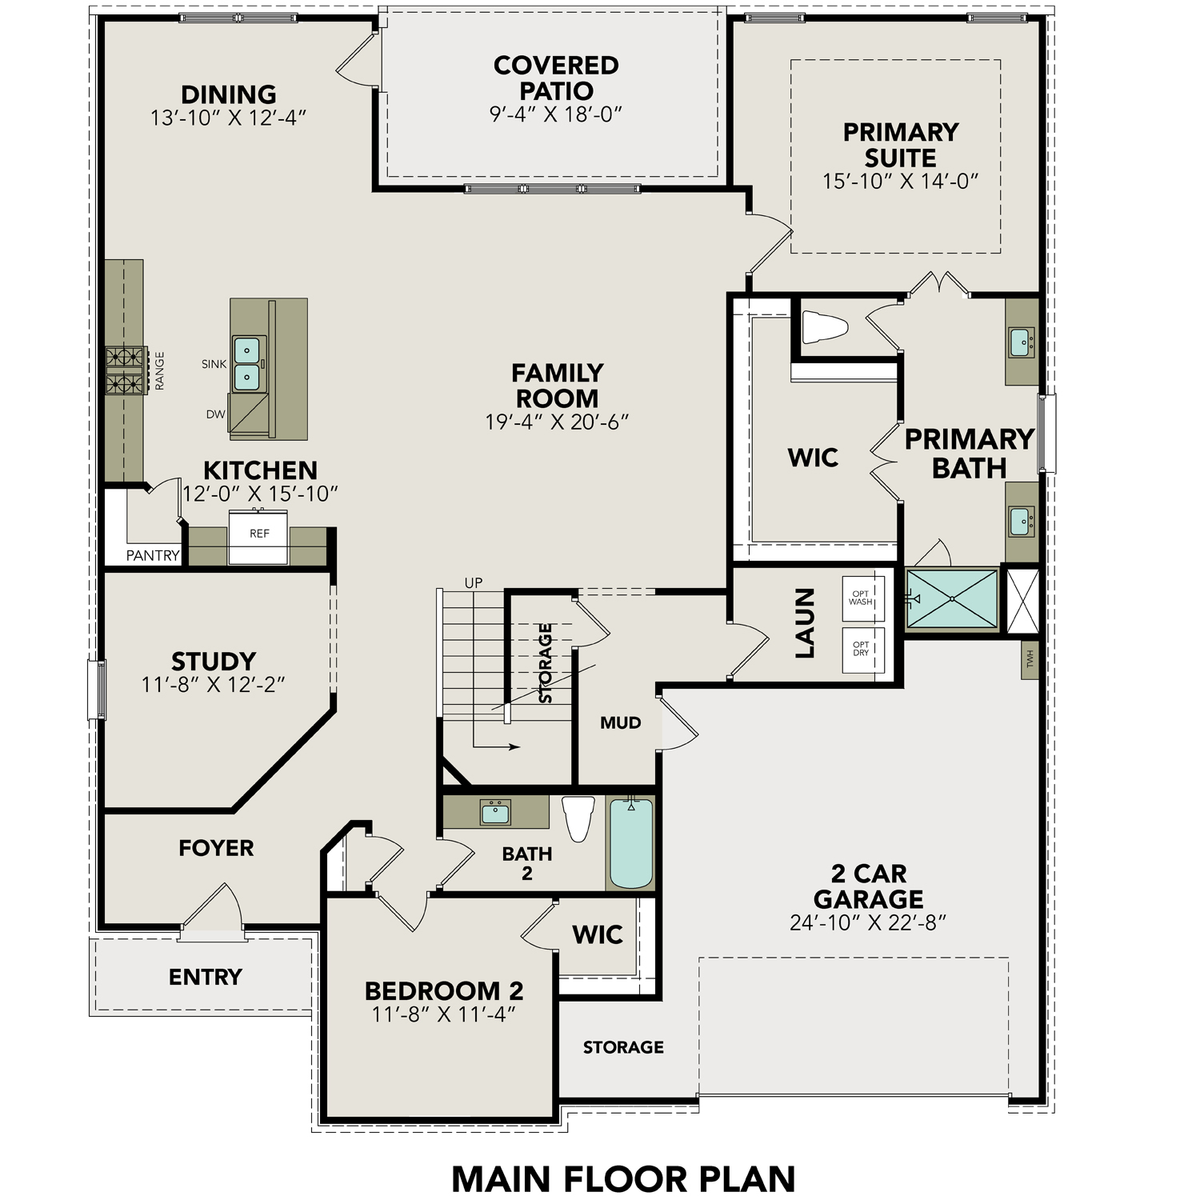 1 - The Jennings G floor plan layout for 248 Jereth Crossing in Davidson Homes' The Reserve at Potranco Oaks community.